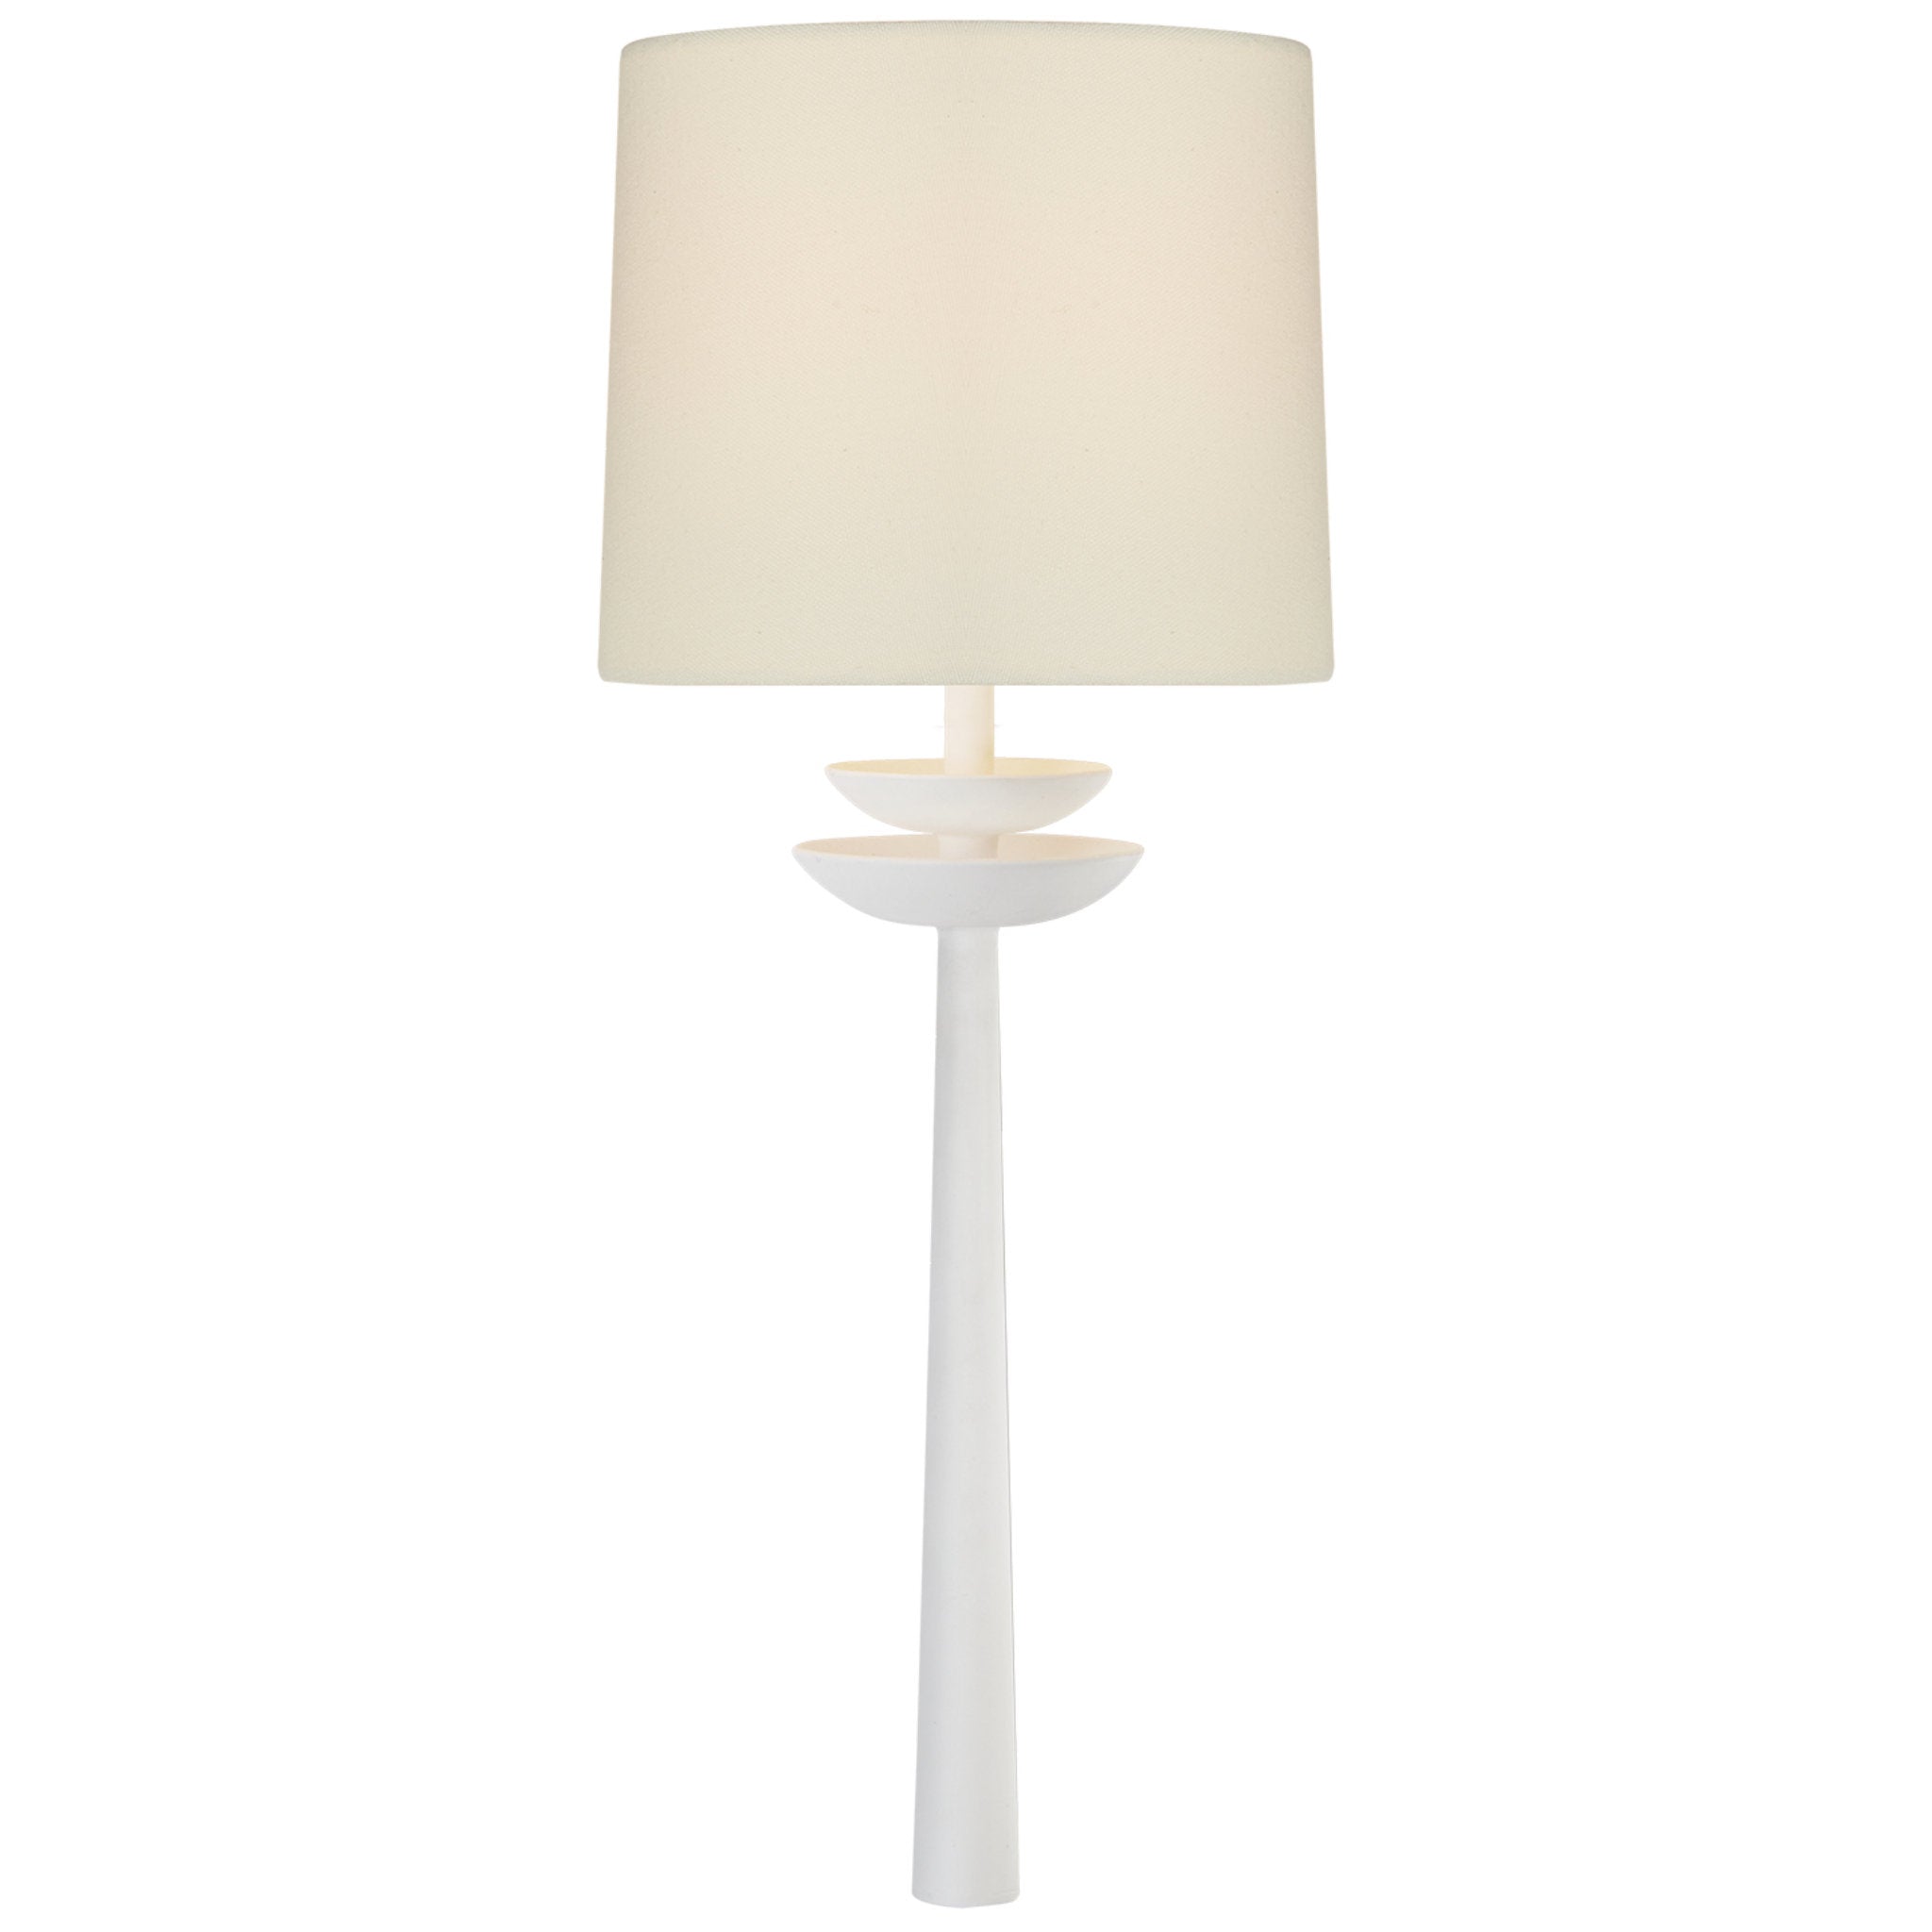 AERIN Beaumont Medium Tail Sconce in White with Linen Shade